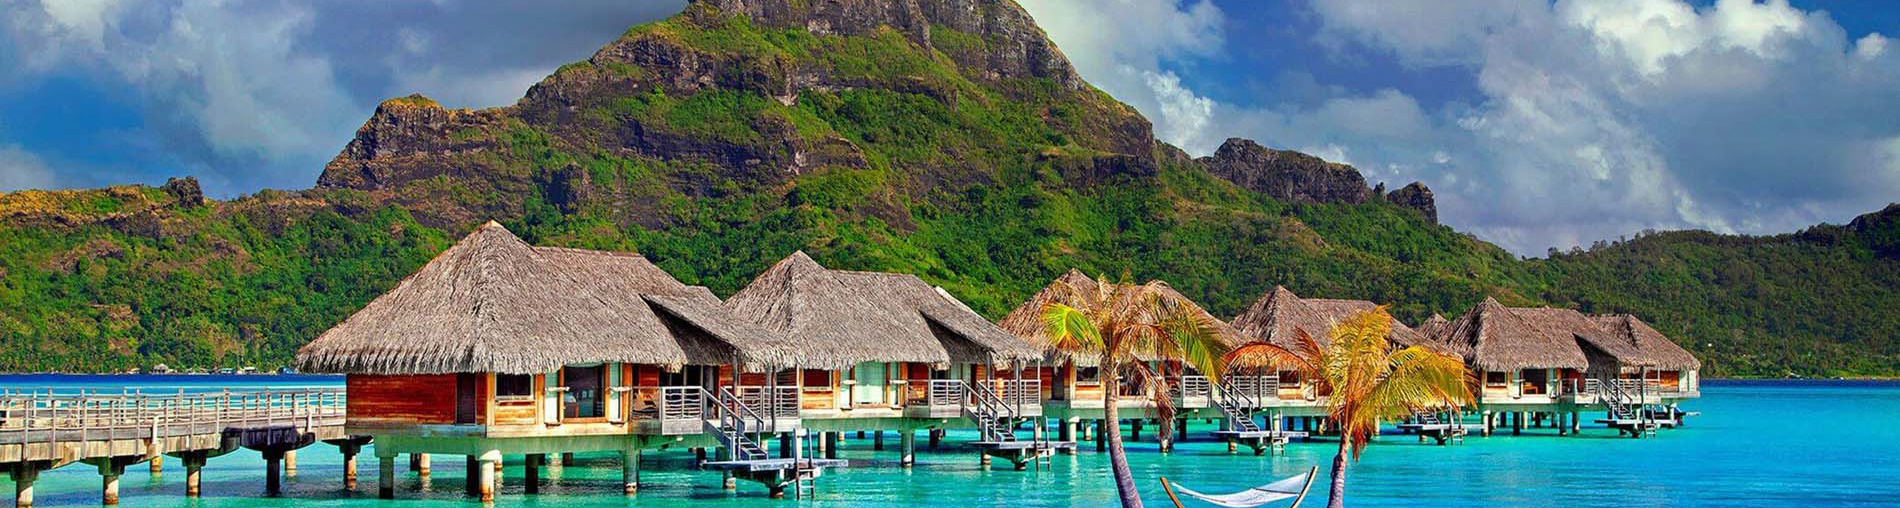 Indian Food Restaurants In French Polynesia